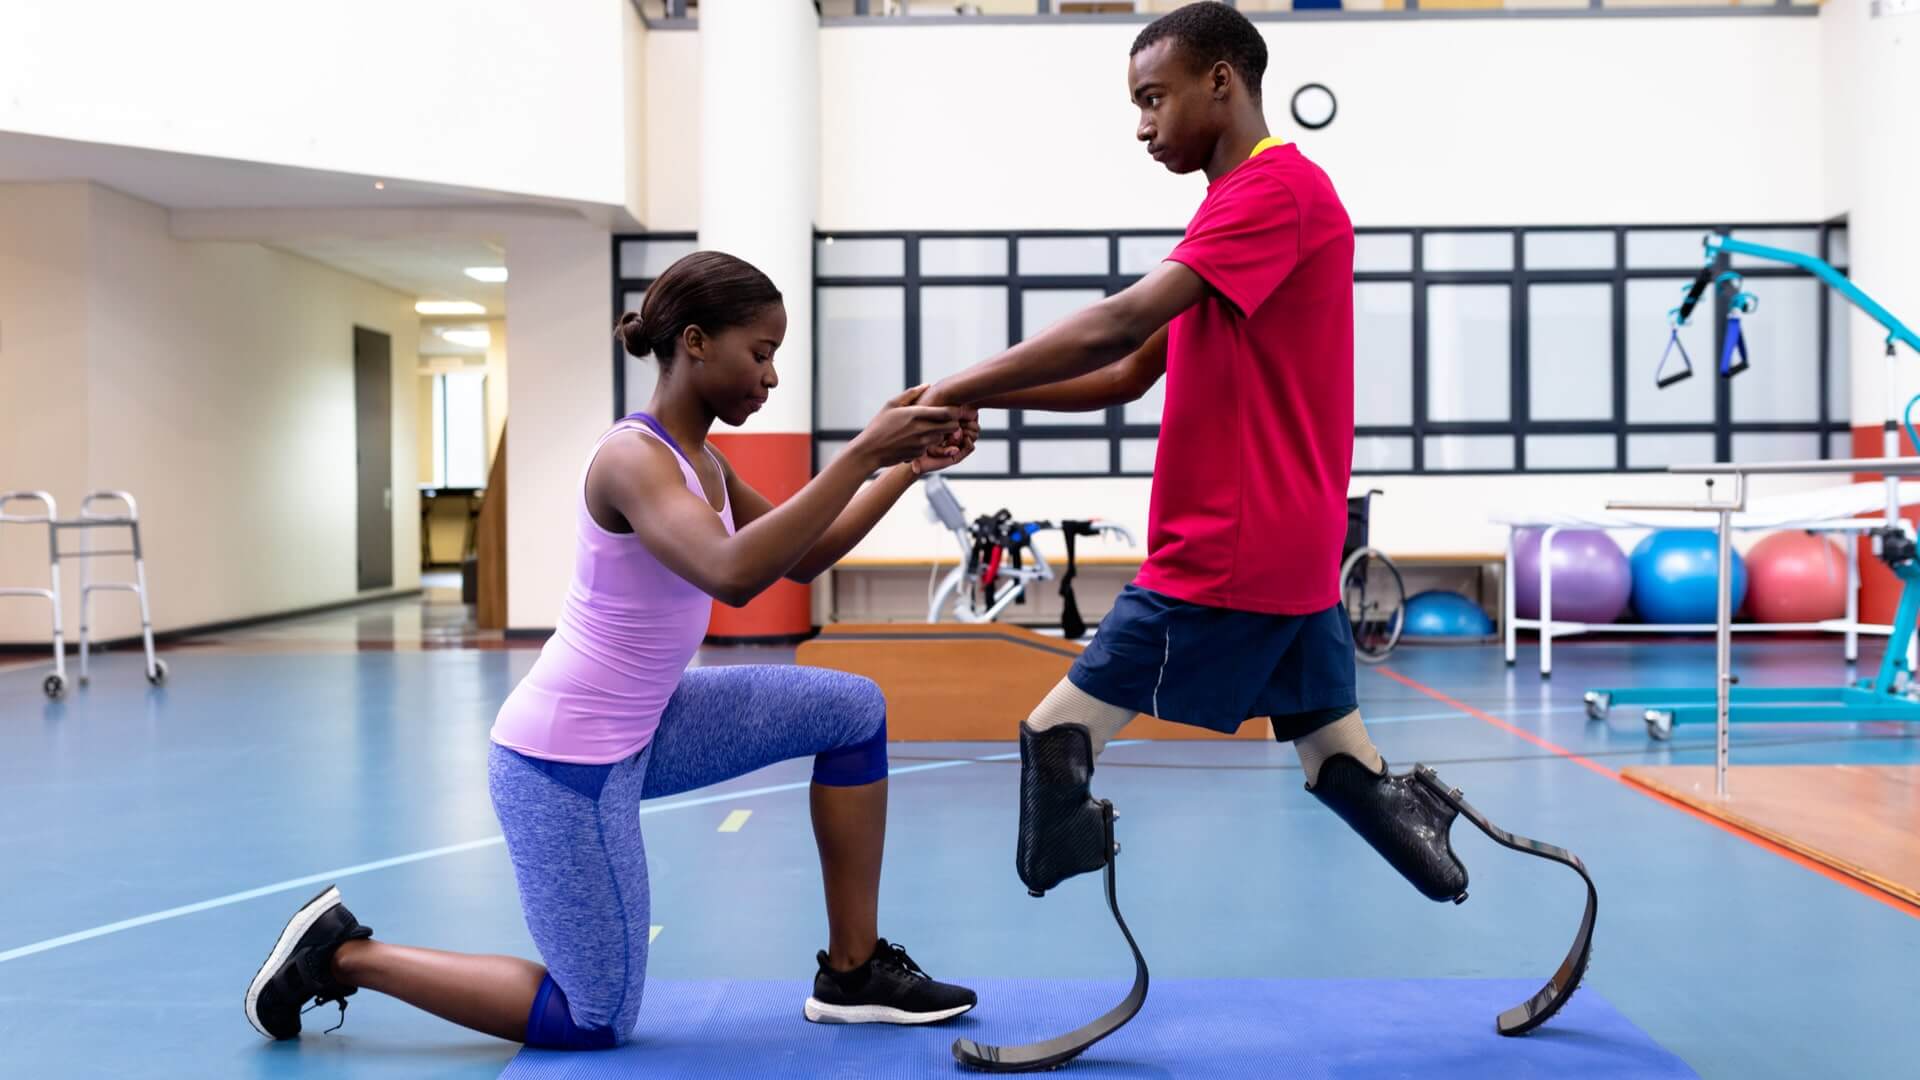 Side view of African-american physiotherapist helping disabled African-american man walk with prosthetic leg in sports center. Sports Rehab Centre with physiotherapists and patients working together